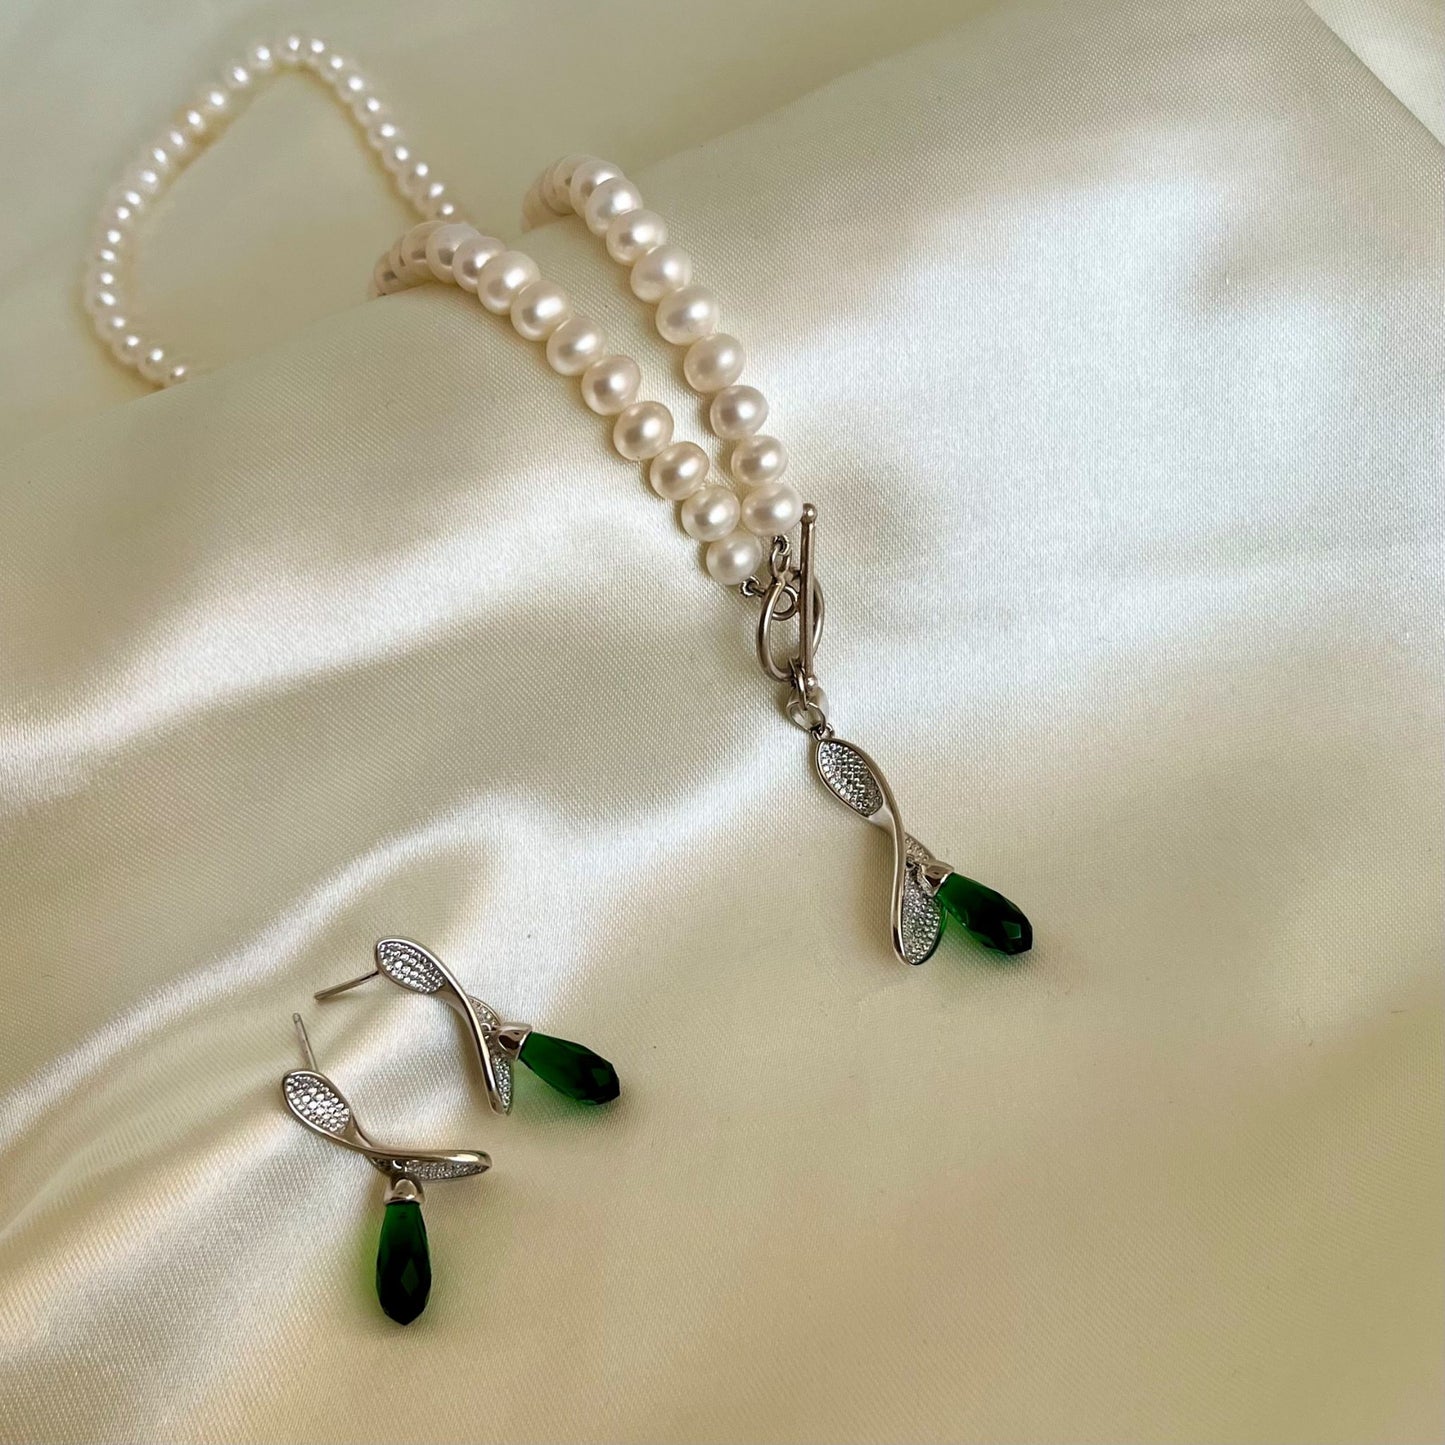 Beautiful Real Pearl Necklace in green stone